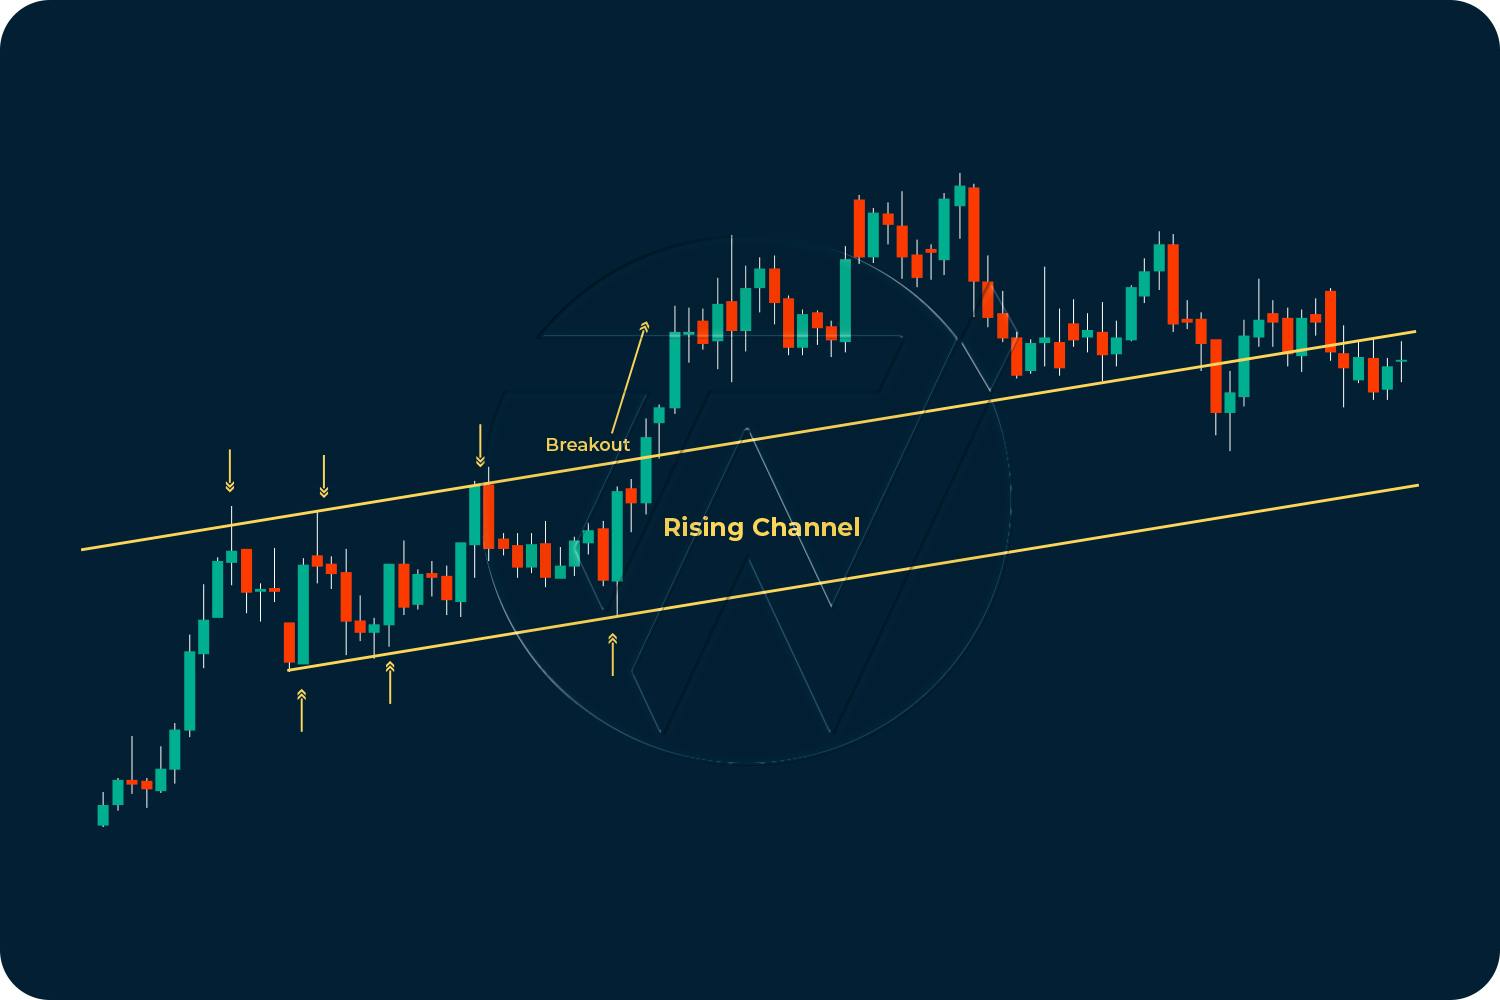 Candlestick chart patterns illustrating rising channel breakout